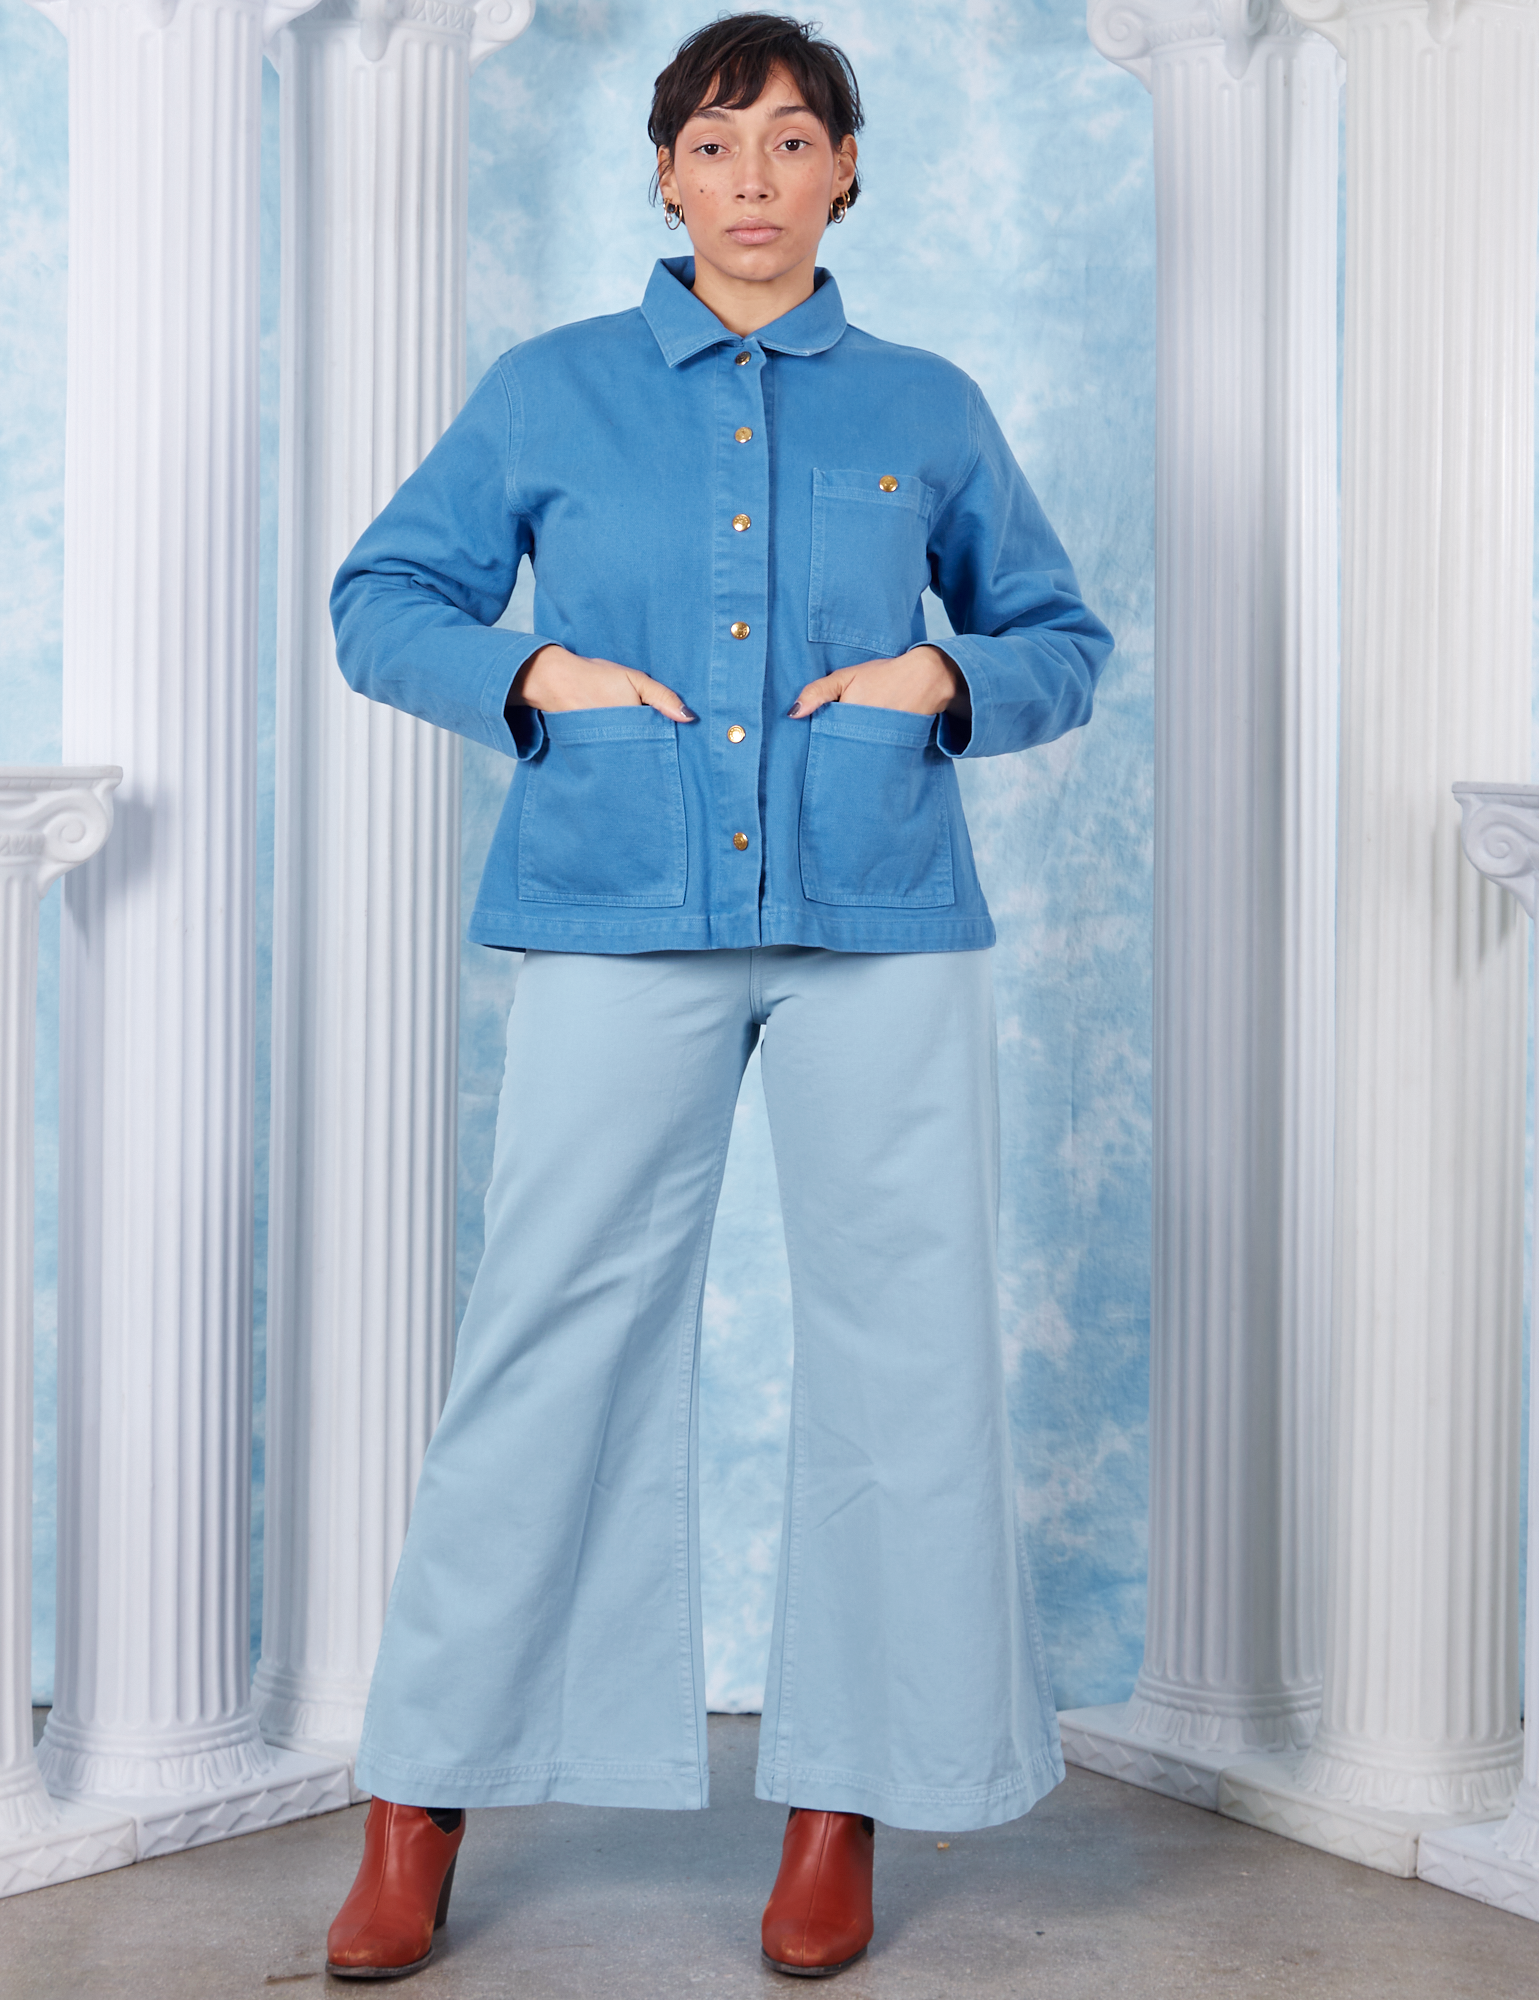 Neoclassical Work Jacket in Blue Venus buttoned up on Tiara wearing baby blue Bell Bottoms